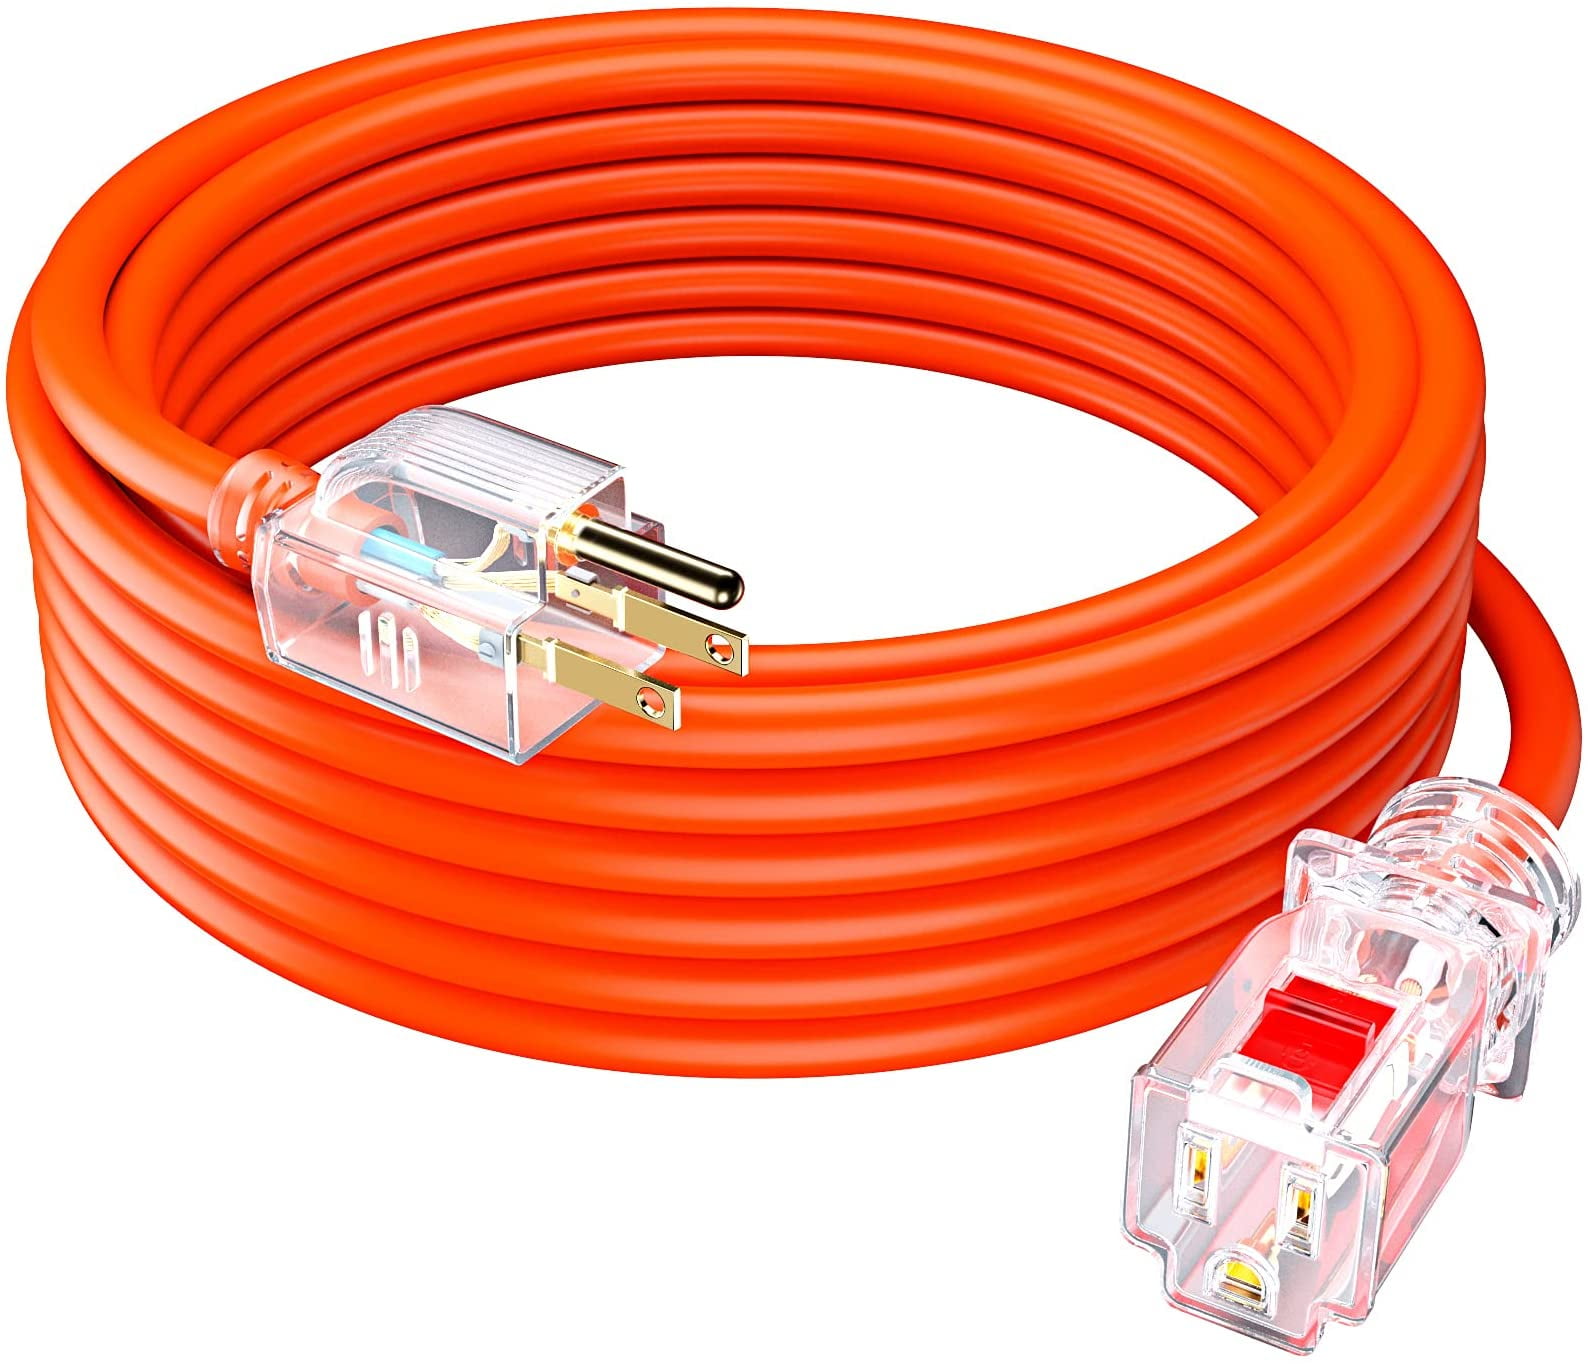 Maximm Cable 25 ft Extension Cord - Safety Extension Cord with Lighted  Power Indicator and Lock - Orange, 16 AWG, SJTW, Heavy Duty Outdoor  Extension